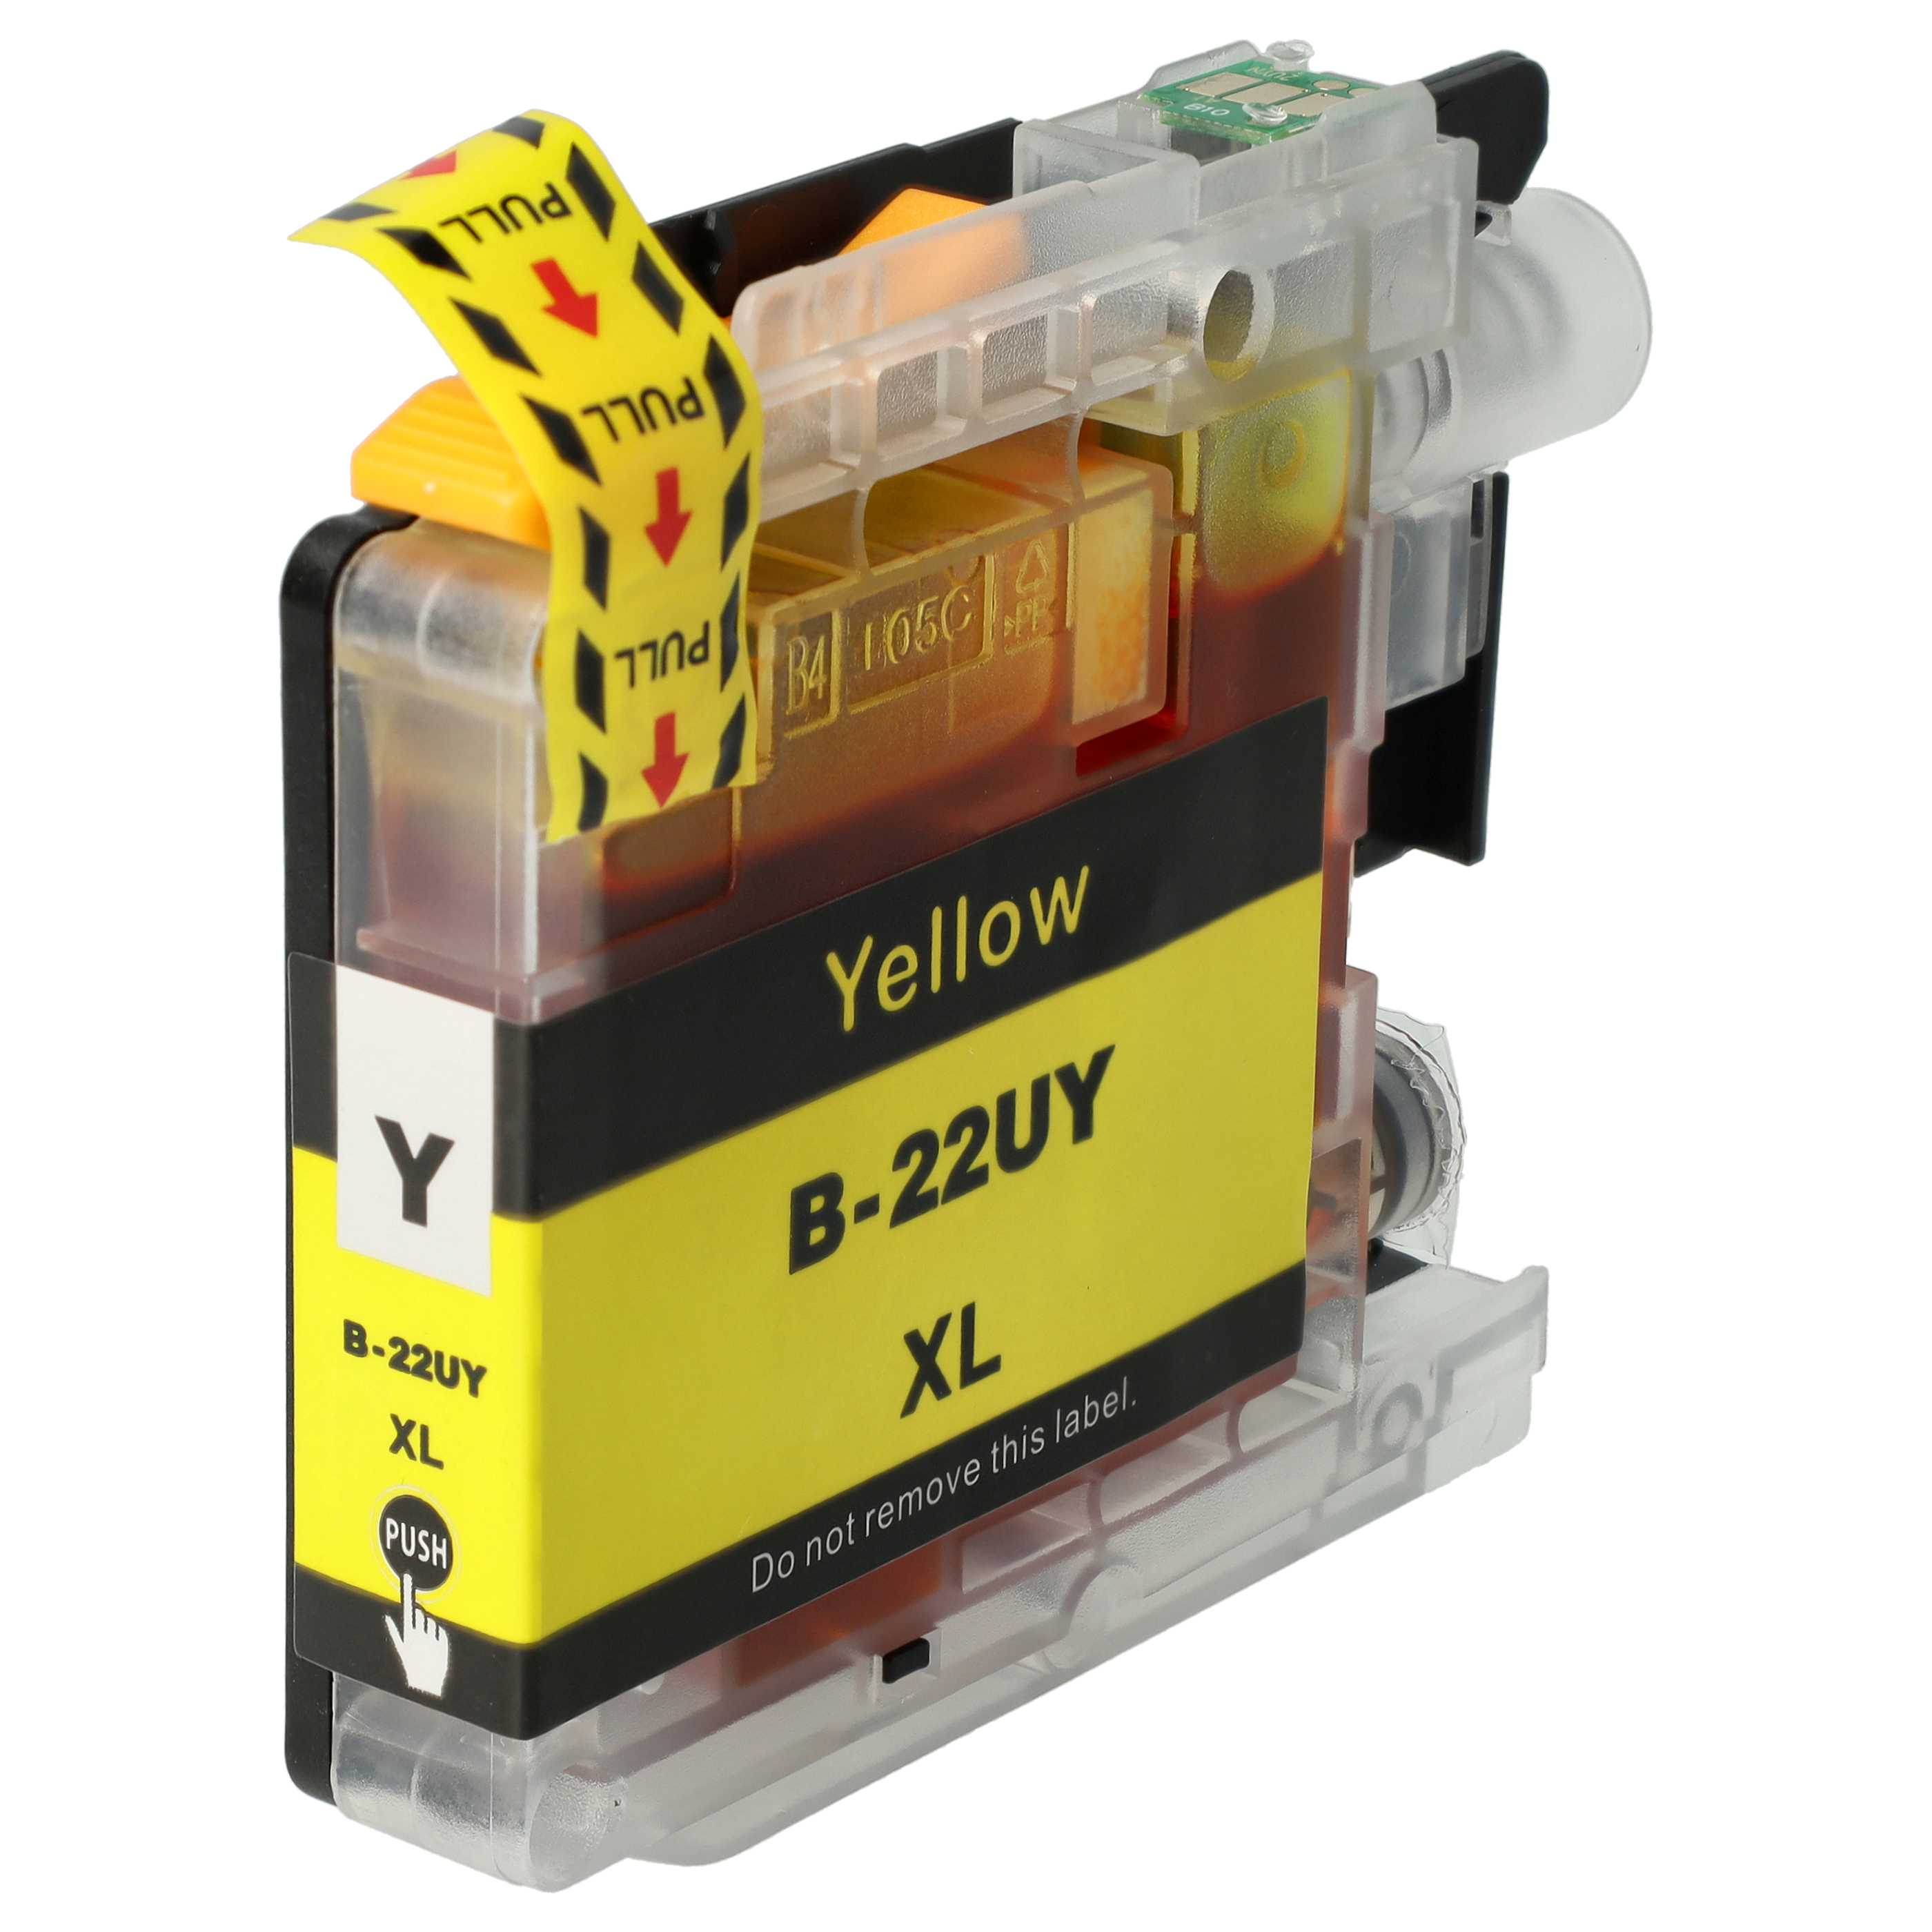 Cartouche remplace Brother LC-22U Y, LC-22UY, LC-22UYXL, LC22UY pour imprimante Brother - Jaune 15ml + puce